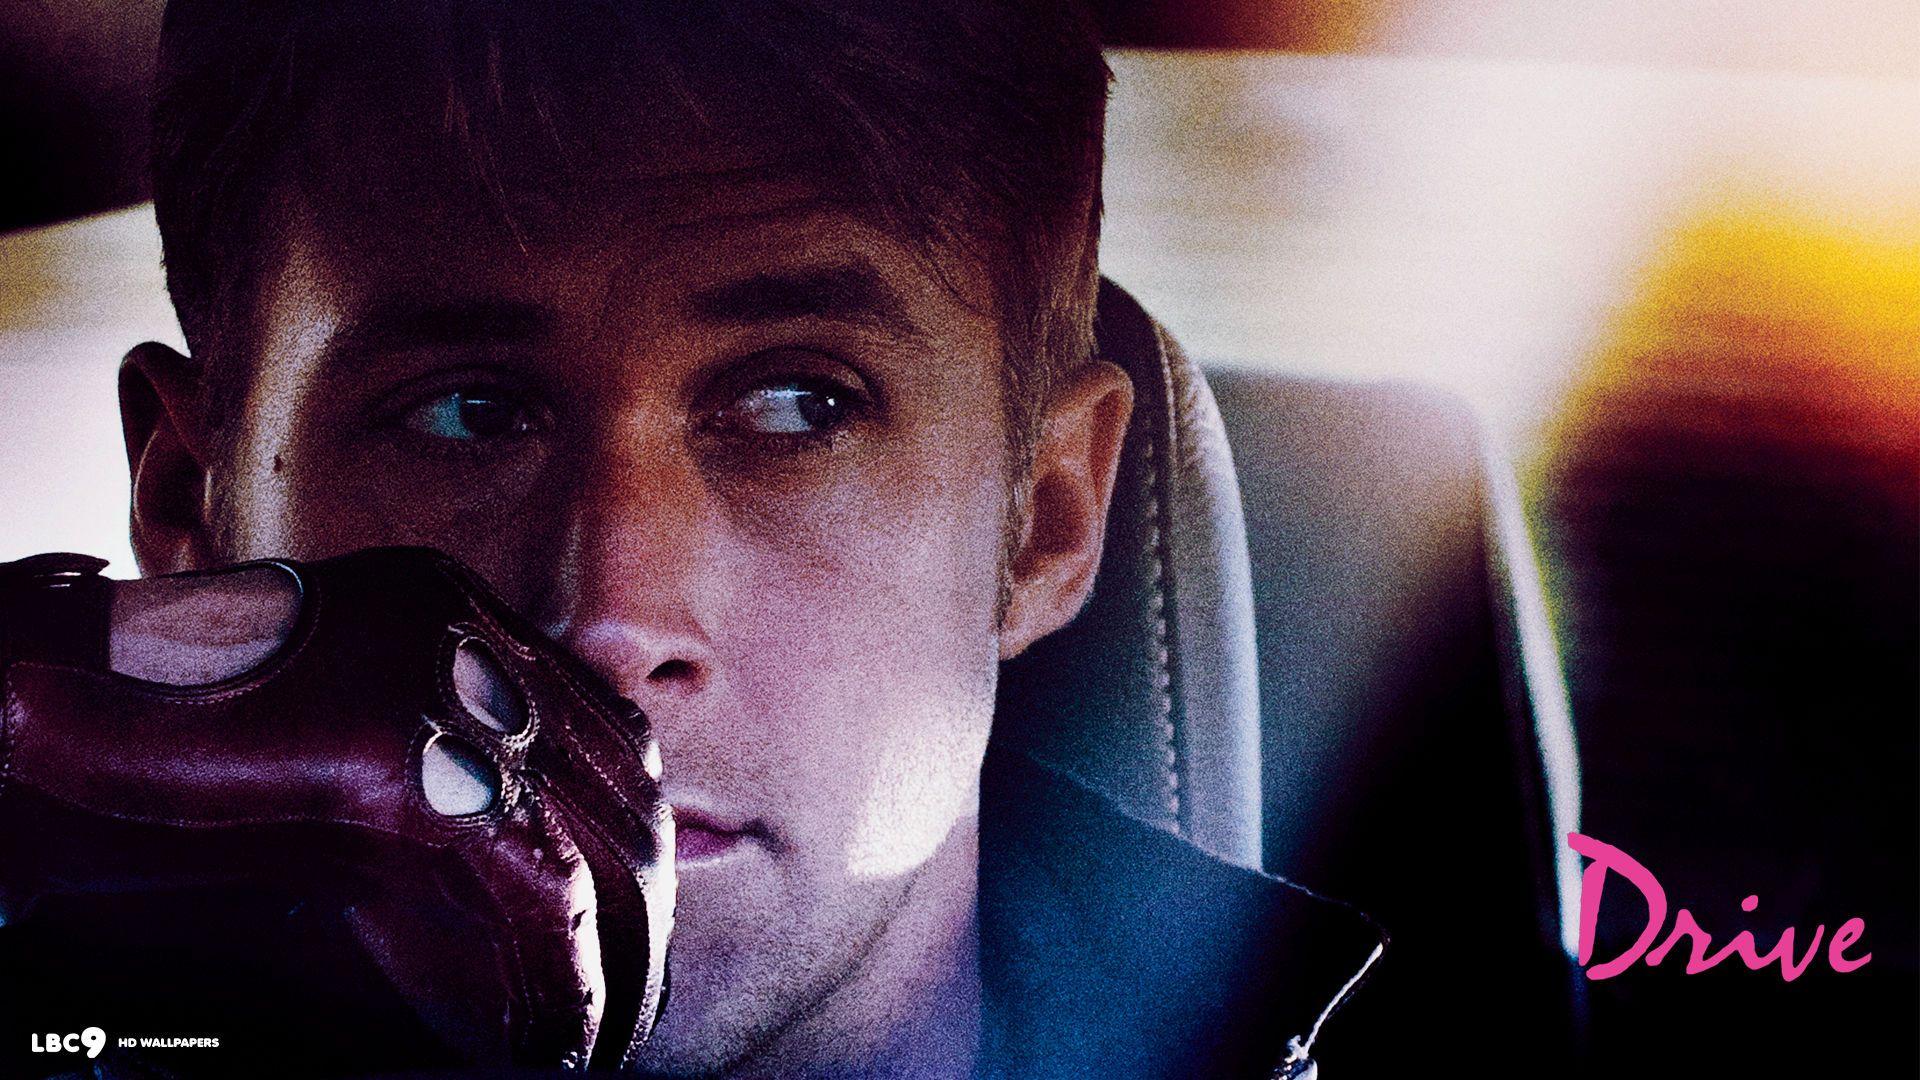 Wallpapers High Resolution Ryan Gosling Drive Movie - Wallpaper Cave